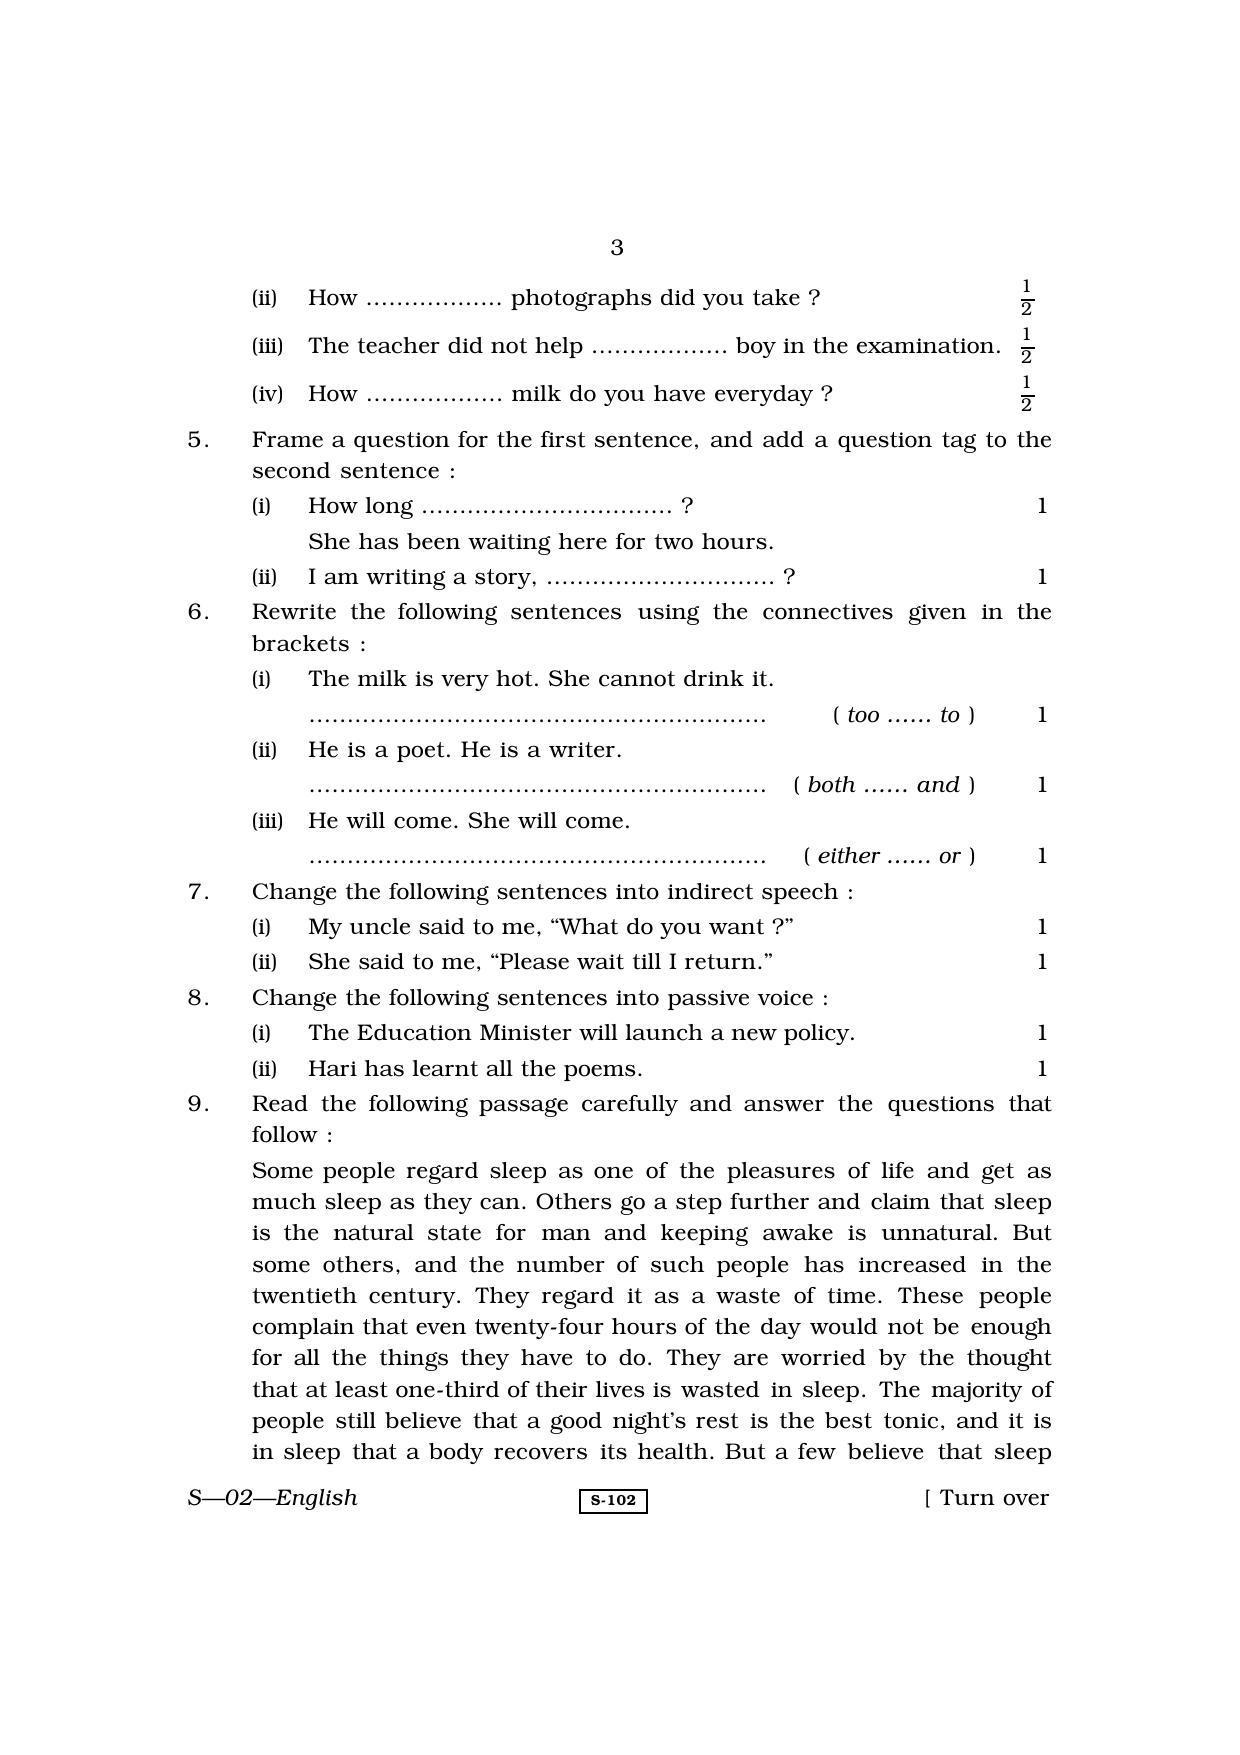 RBSE Class 10 English 2010 Question Paper - Page 3